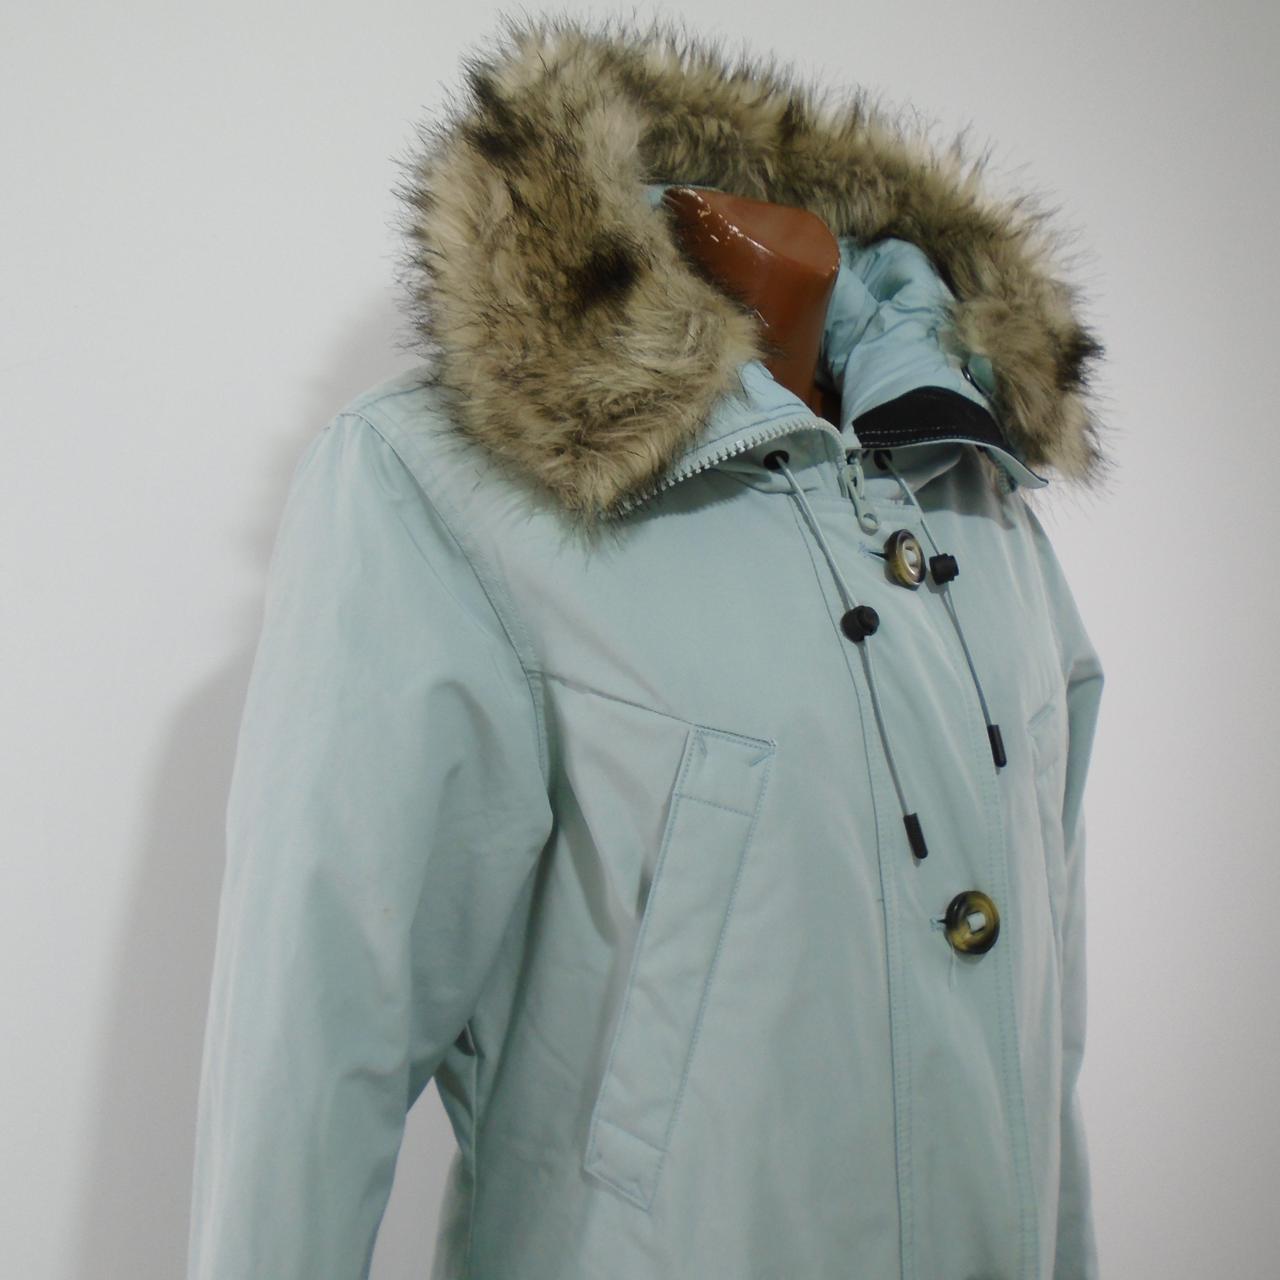 Women's Parka Superdry. Blue. XL. Used. Very good